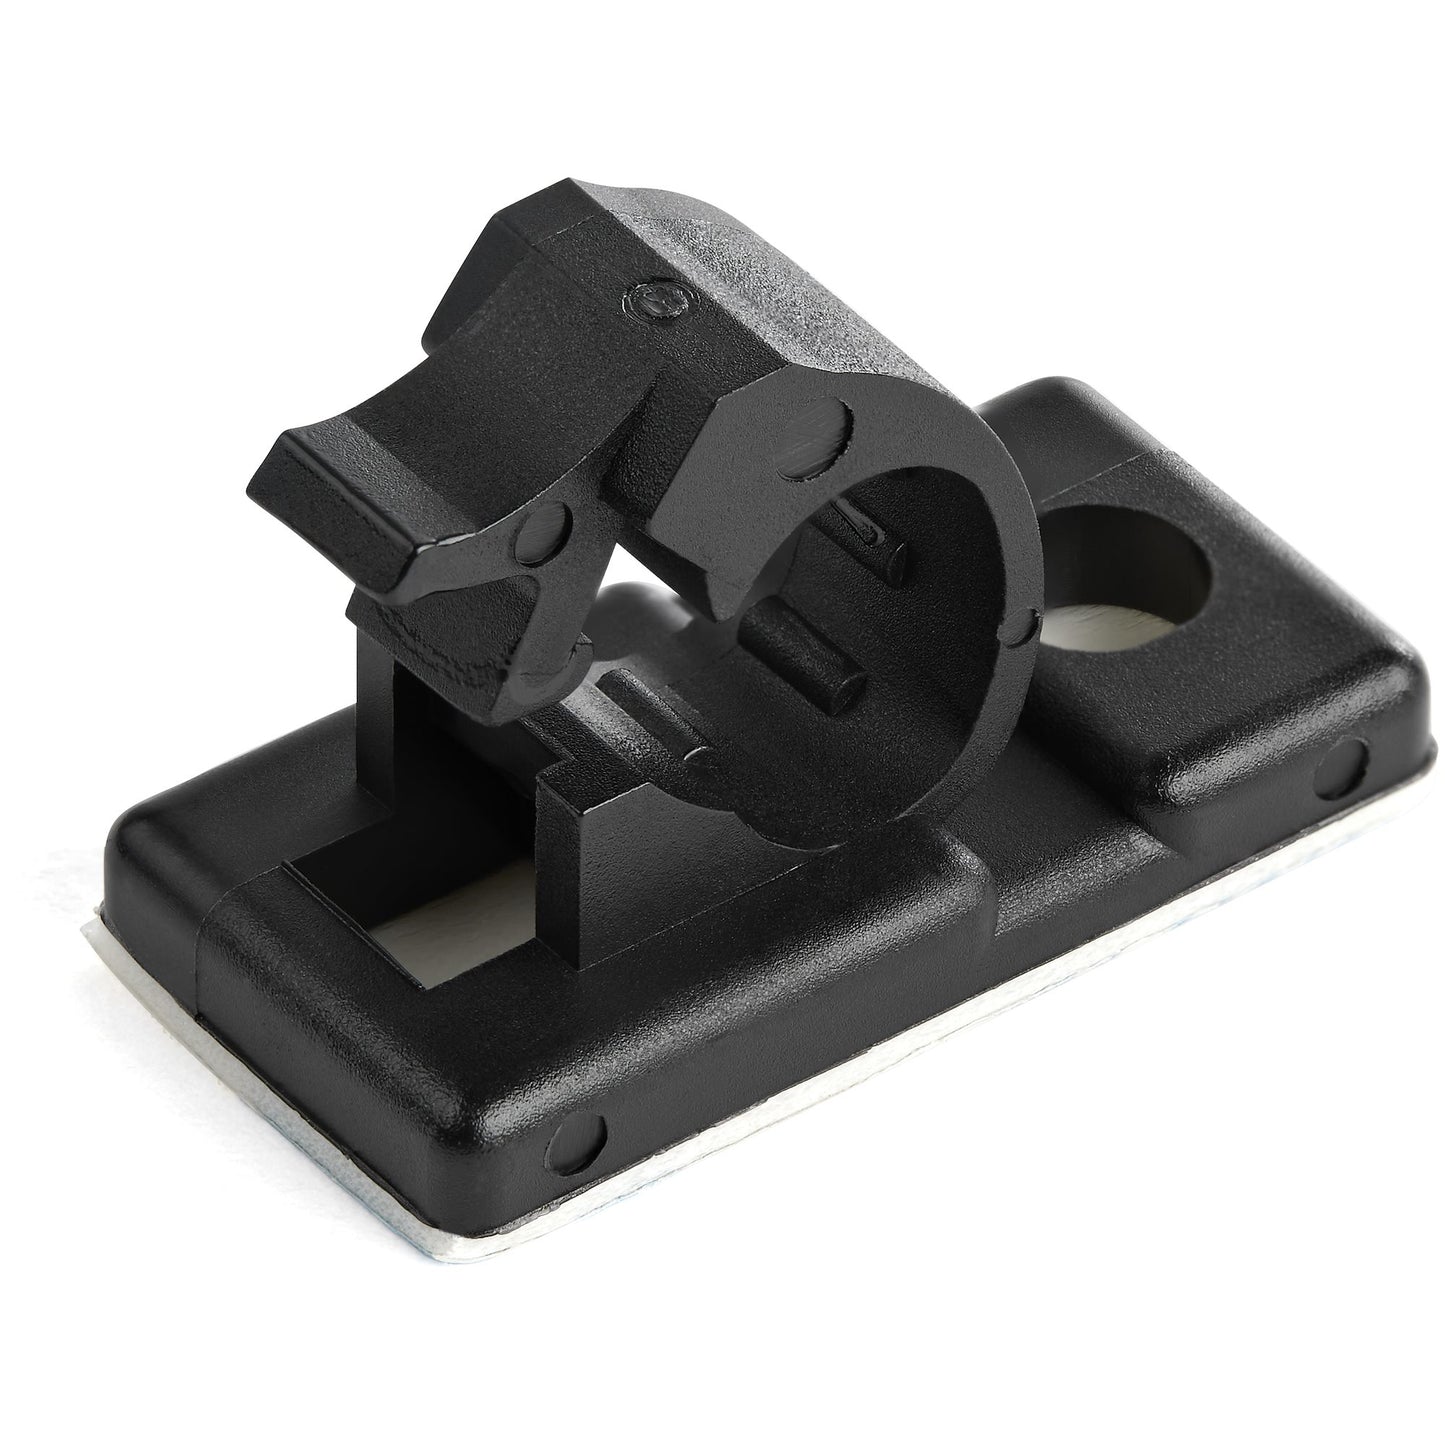 StarTech.com 100 Adhesive Cable Management Clips Black - Network/Ethernet/Office Desk/Computer Cord Organizer - Sticky Cable/Wire Holders - Nylon Self Adhesive Clamp UL/94V-2 Fire Rated-1